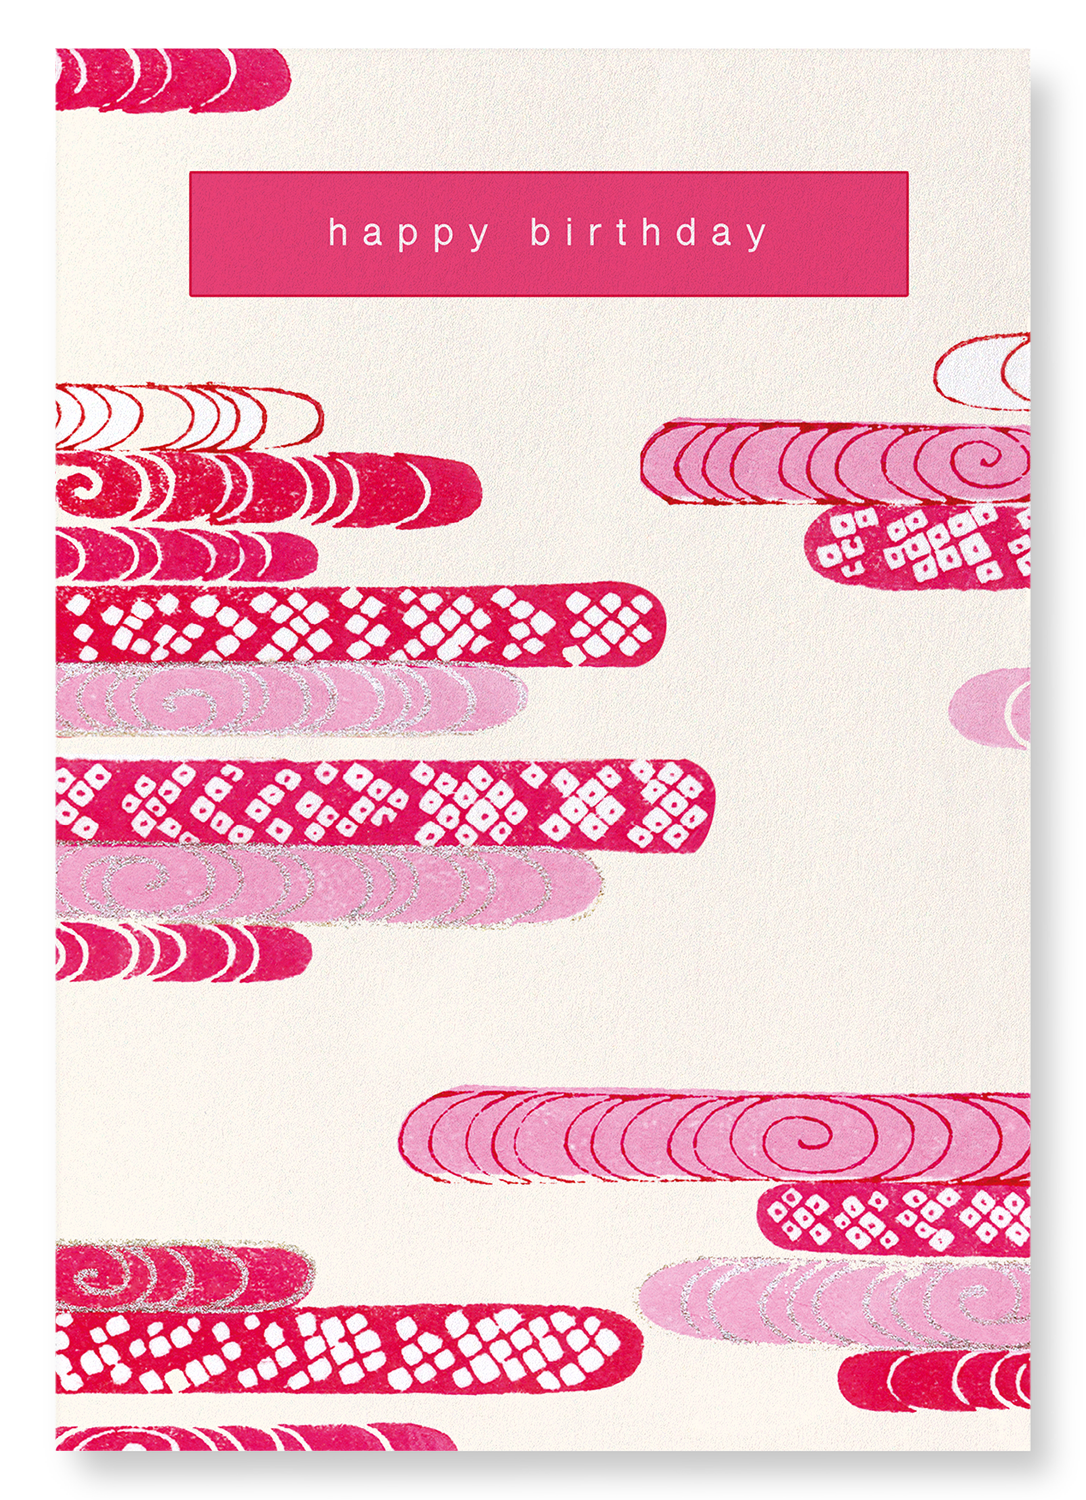 PINK WAVES OF BIRTHDAY WISHES: Japanese Art Print